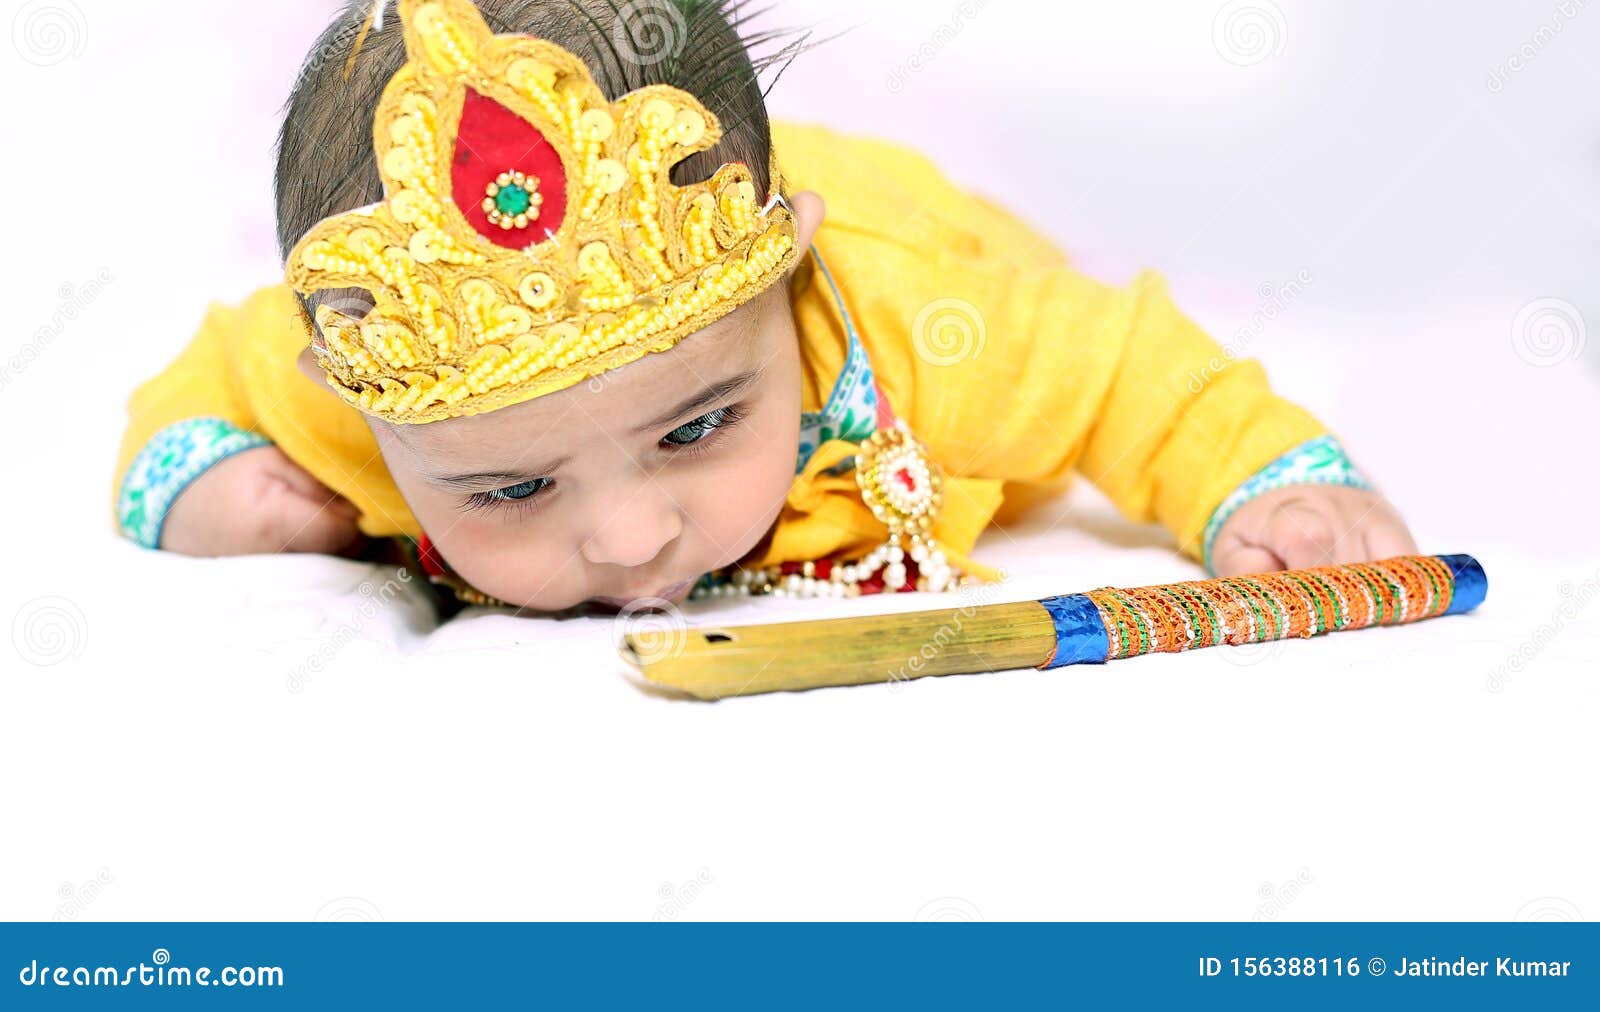 Picture of Baby krishna. stock photo. Image of cute - 156388116